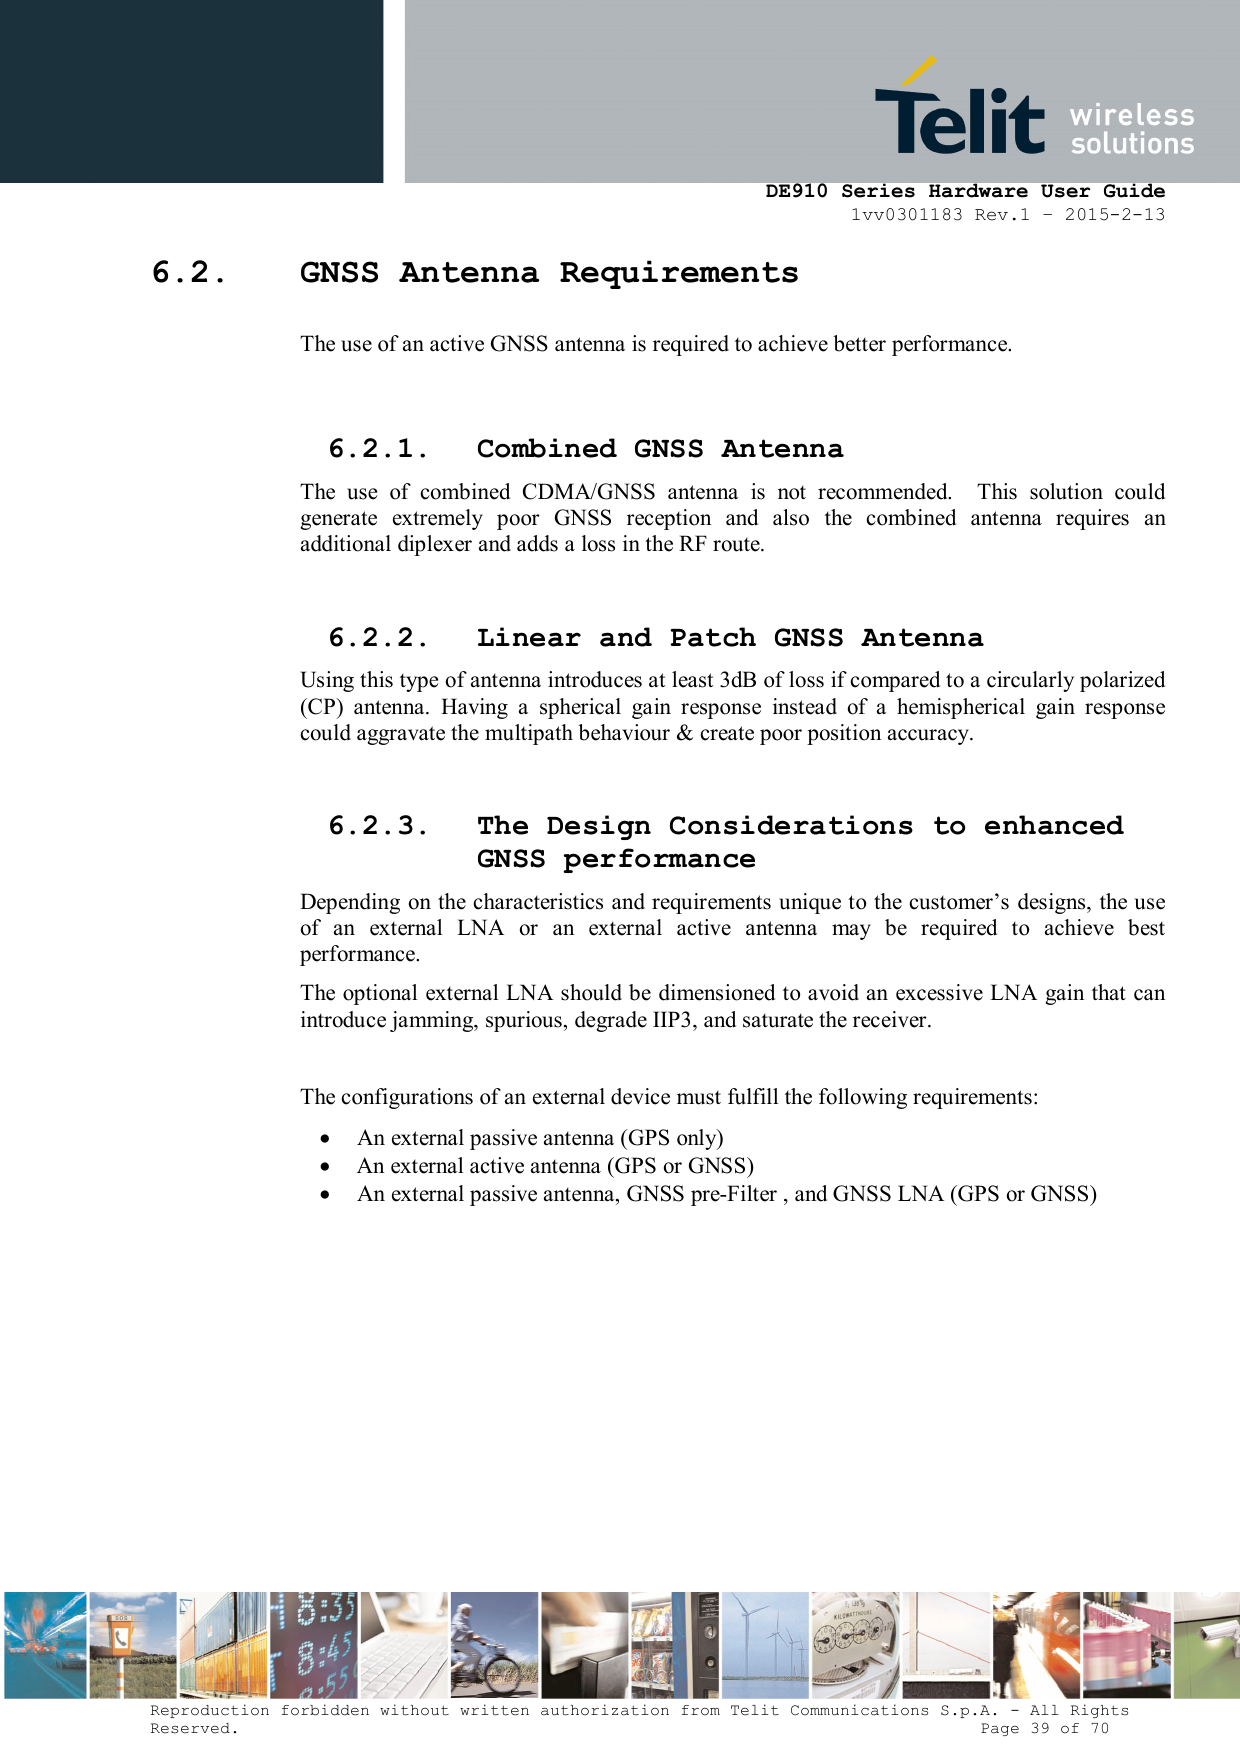      DE910 Series Hardware User Guide 1vv0301183 Rev.1 – 2015-2-13 Reproduction forbidden without written authorization from Telit Communications S.p.A. - All Rights Reserved.                                                                          Page 39 of 70 6.2. GNSS Antenna Requirements The use of an active GNSS antenna is required to achieve better performance.  6.2.1. Combined GNSS Antenna The  use  of  combined  CDMA/GNSS  antenna  is  not  recommended.    This  solution  could generate  extremely  poor  GNSS  reception  and  also  the  combined  antenna  requires  an additional diplexer and adds a loss in the RF route.  6.2.2. Linear and Patch GNSS Antenna Using this type of antenna introduces at least 3dB of loss if compared to a circularly polarized (CP)  antenna.  Having  a  spherical  gain  response  instead  of  a  hemispherical  gain  response could aggravate the multipath behaviour &amp; create poor position accuracy.  6.2.3. The Design Considerations to enhanced GNSS performance Depending on the characteristics and requirements unique to the customer’s designs, the use of  an  external  LNA  or  an  external  active  antenna  may  be  required  to  achieve  best performance. The optional external LNA should be  dimensioned to avoid an  excessive LNA gain that can introduce jamming, spurious, degrade IIP3, and saturate the receiver.   The configurations of an external device must fulfill the following requirements:  An external passive antenna (GPS only)  An external active antenna (GPS or GNSS)  An external passive antenna, GNSS pre-Filter , and GNSS LNA (GPS or GNSS)              